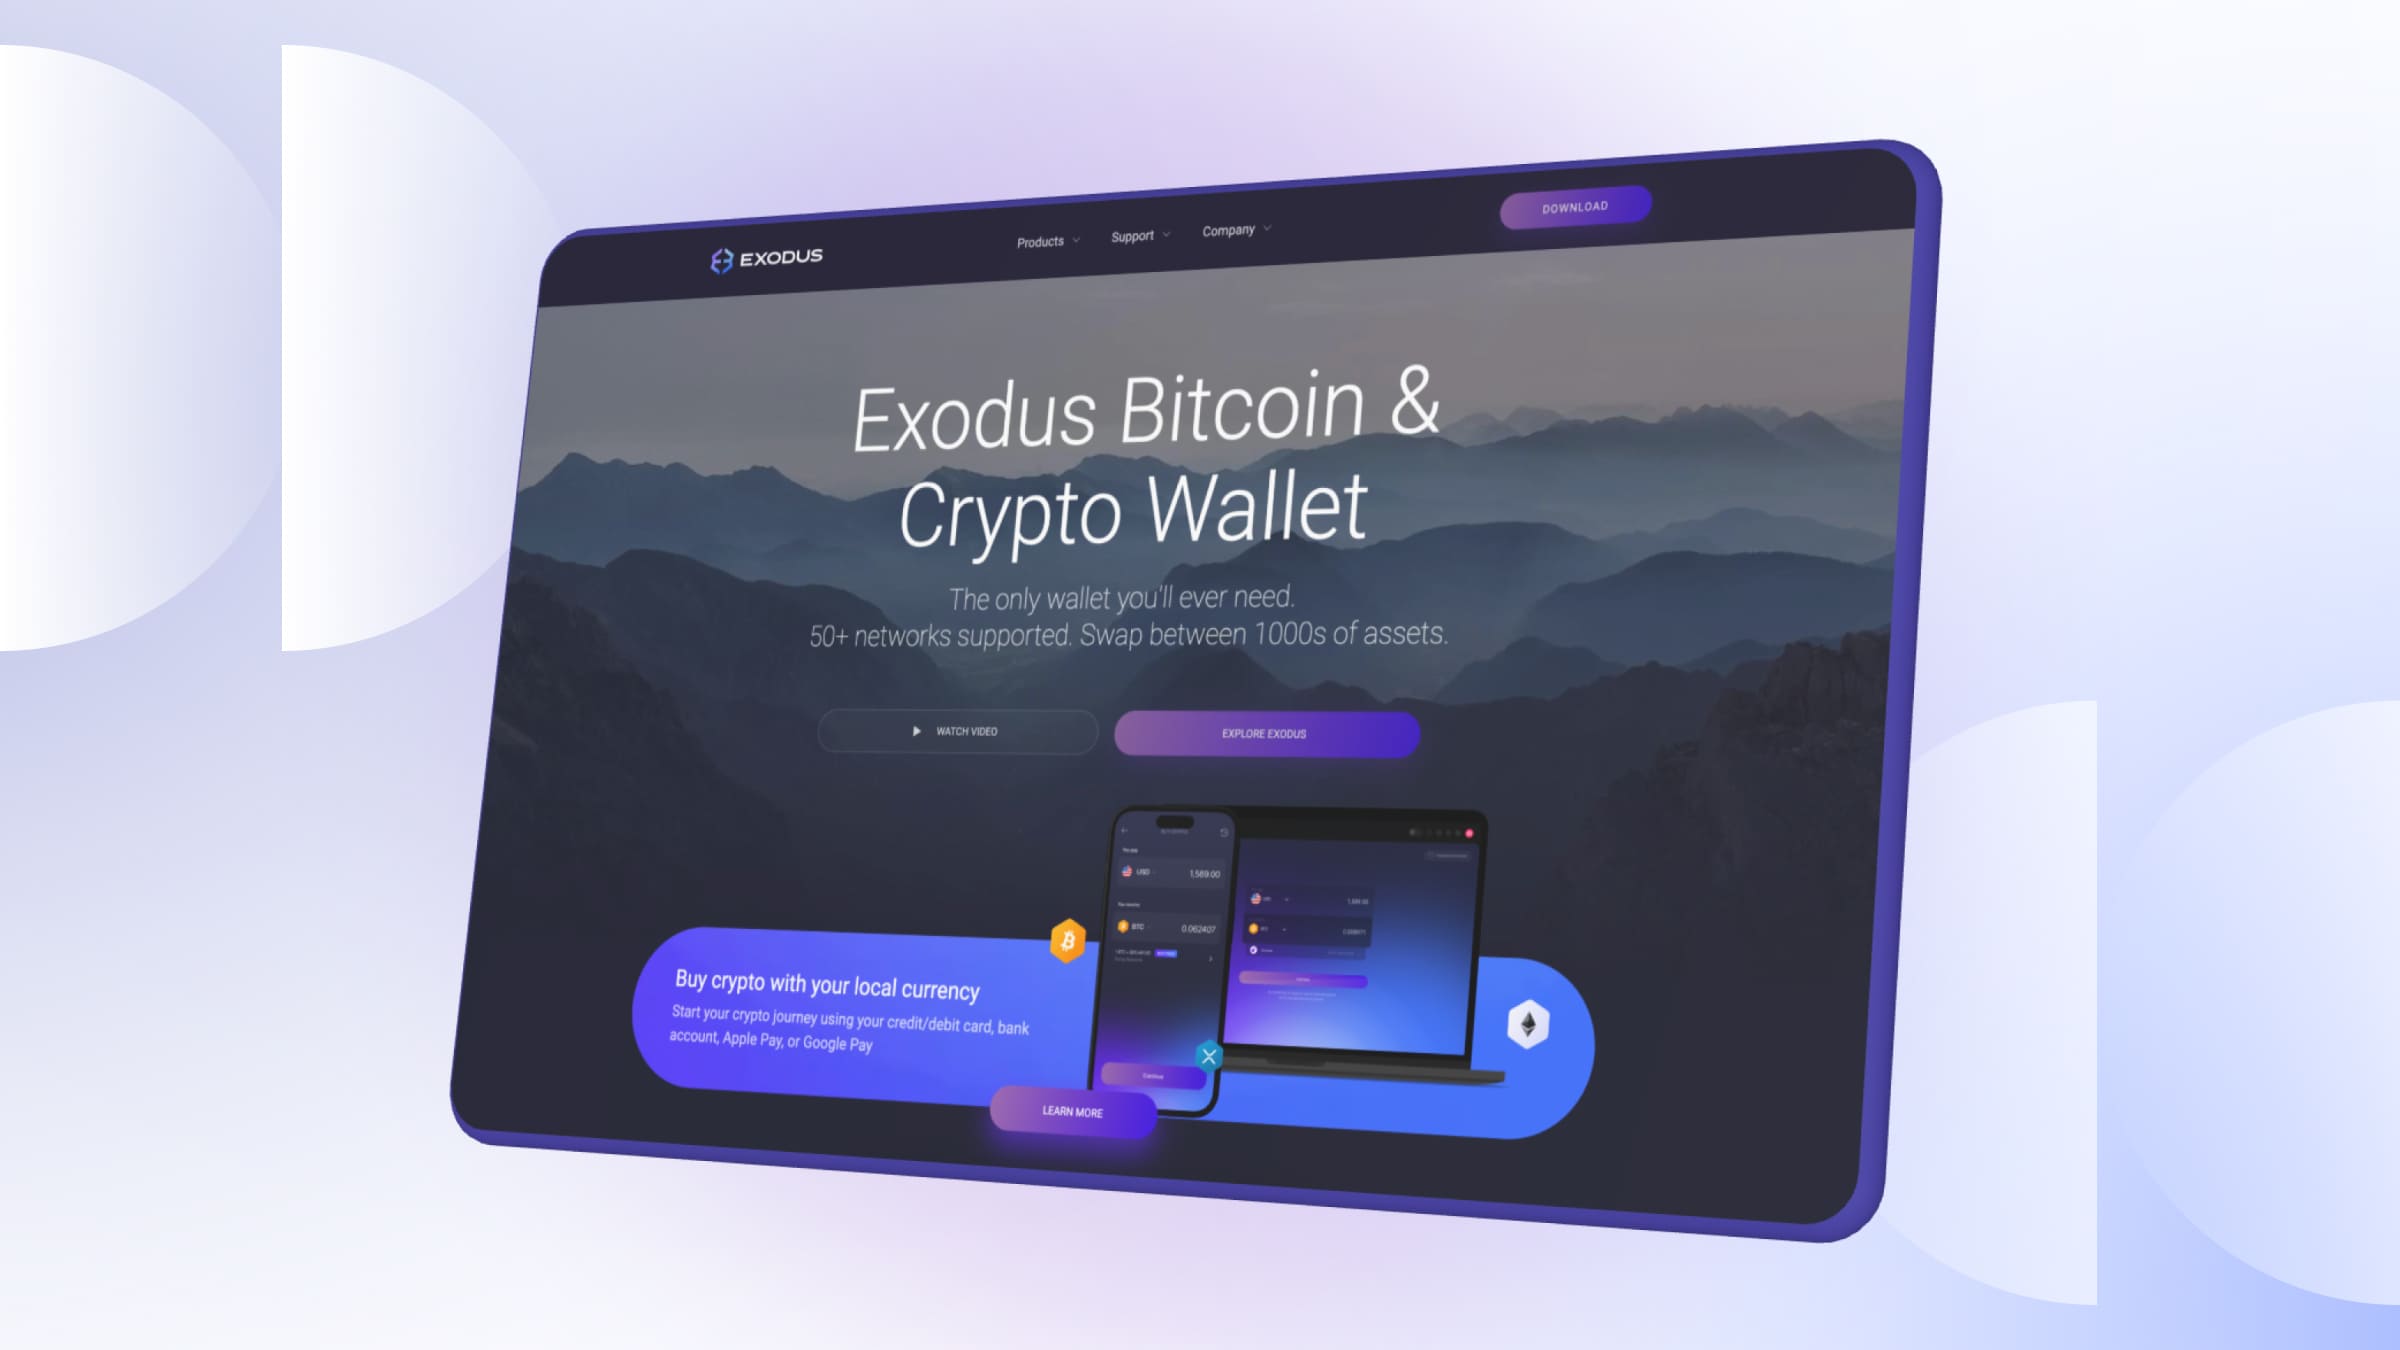 Exodus is one of the popular desktop cryptocurrency wallets.